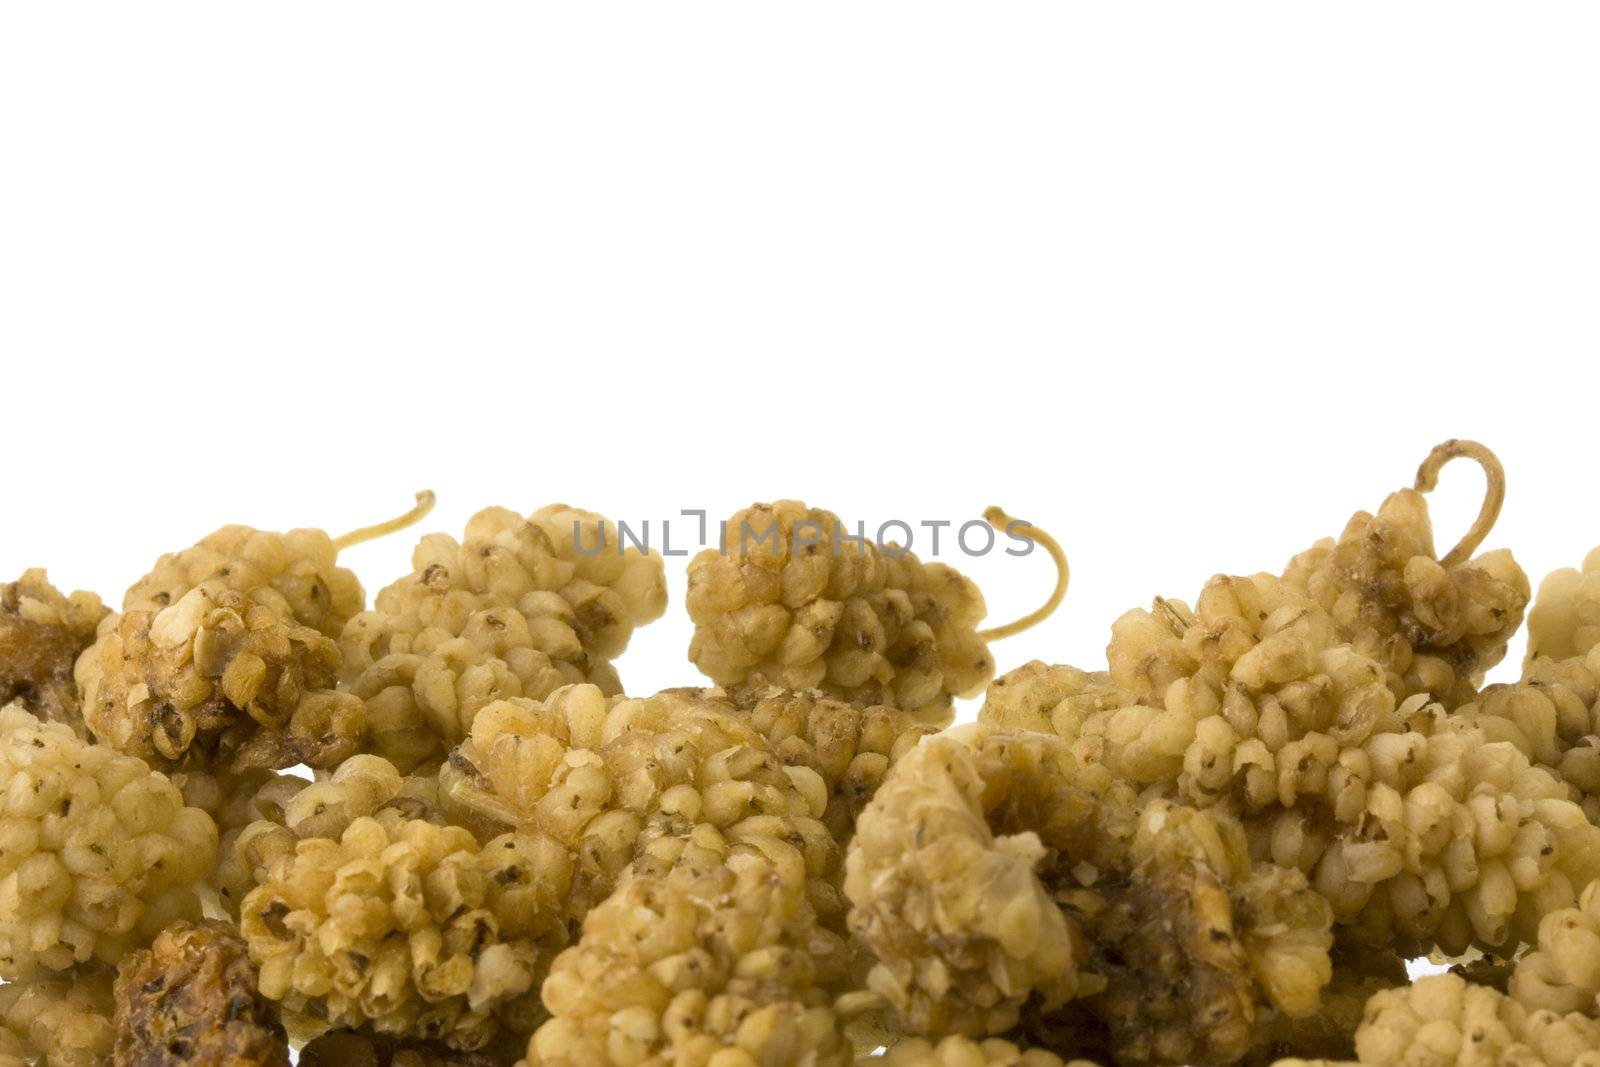 Dried mulberry fruits border. Designed as a bottom border of a page layout with copy space available above the image.